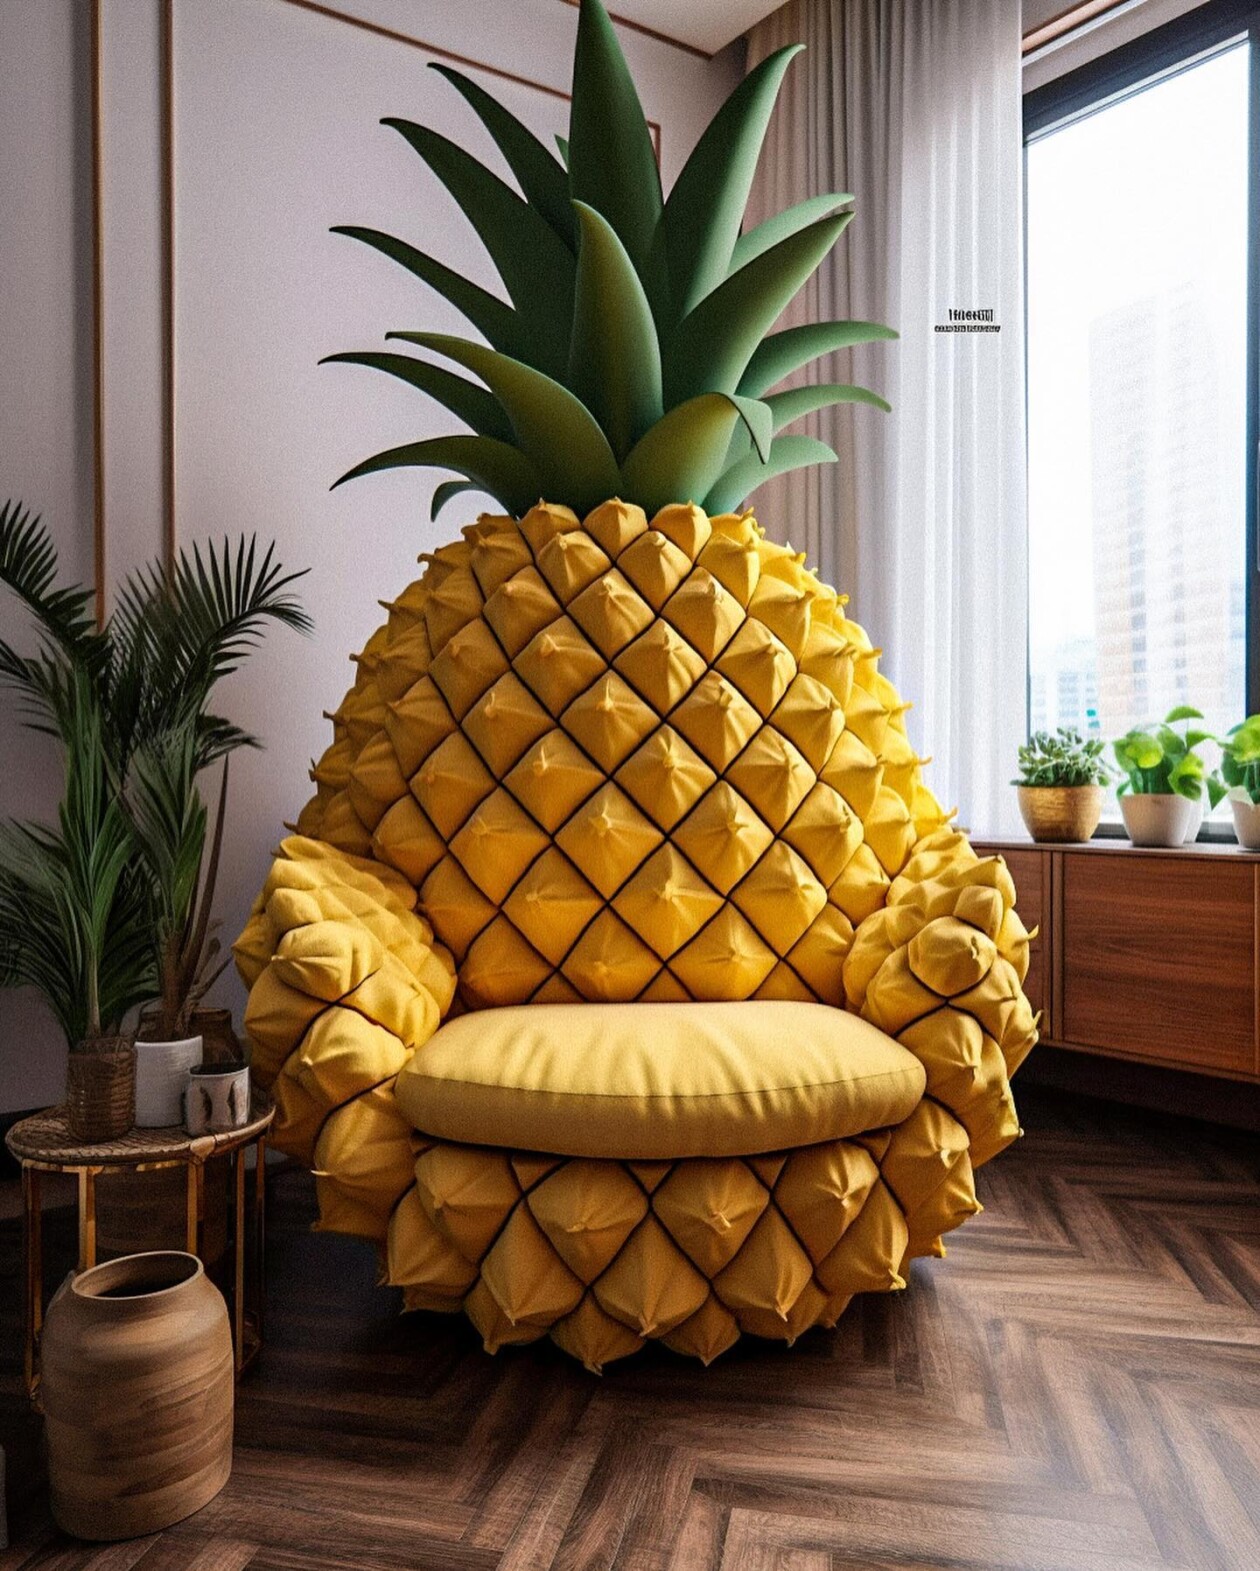 Gorgeous And Amusing Fruit Inspired Lounge Chairs By Dina Dennaoui (9)